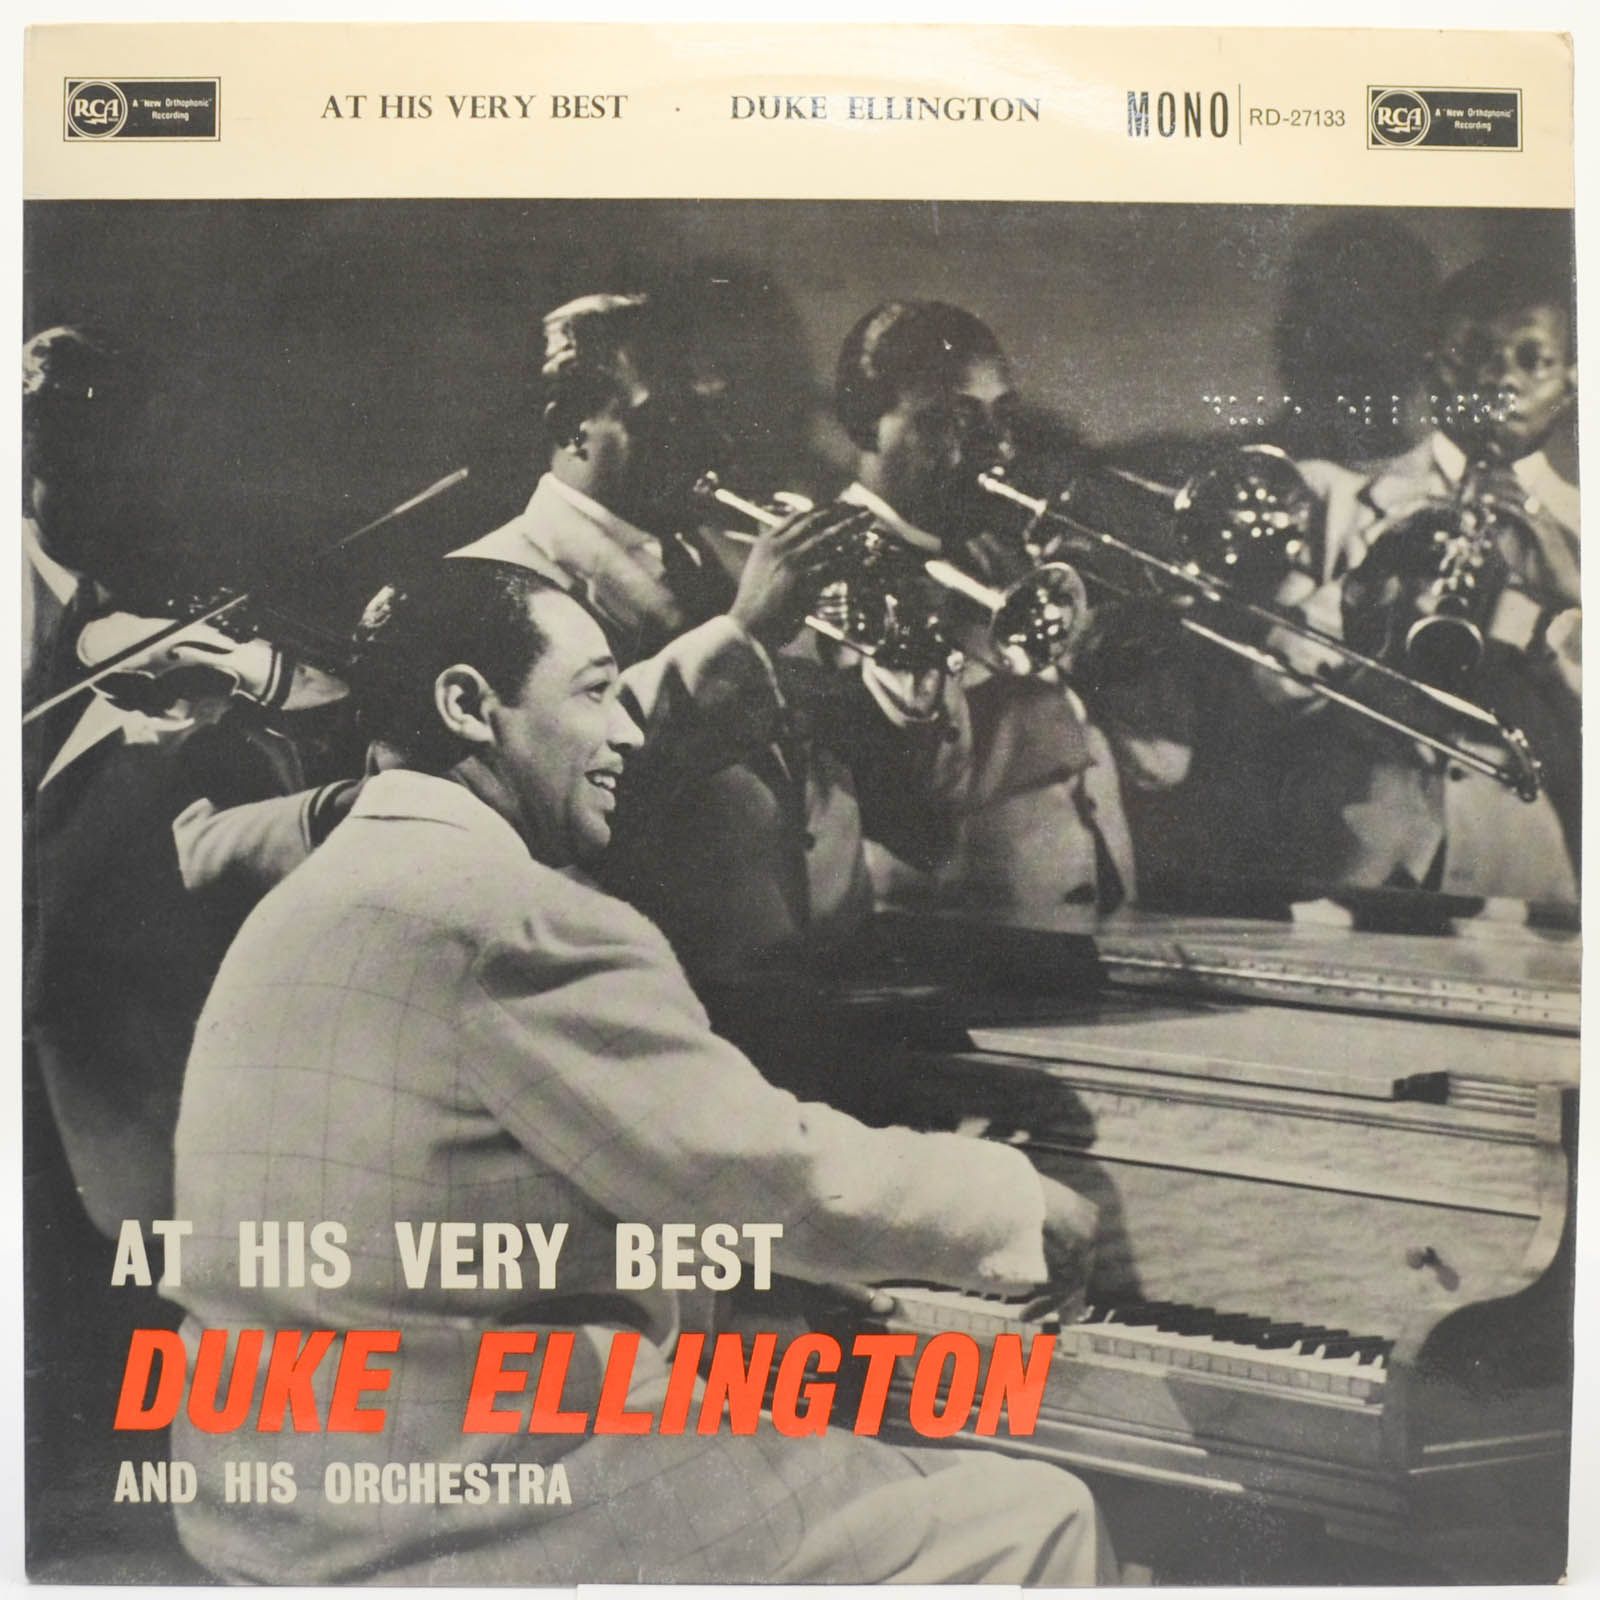 Duke Ellington And His Orchestra — At His Very Best (UK), 1959